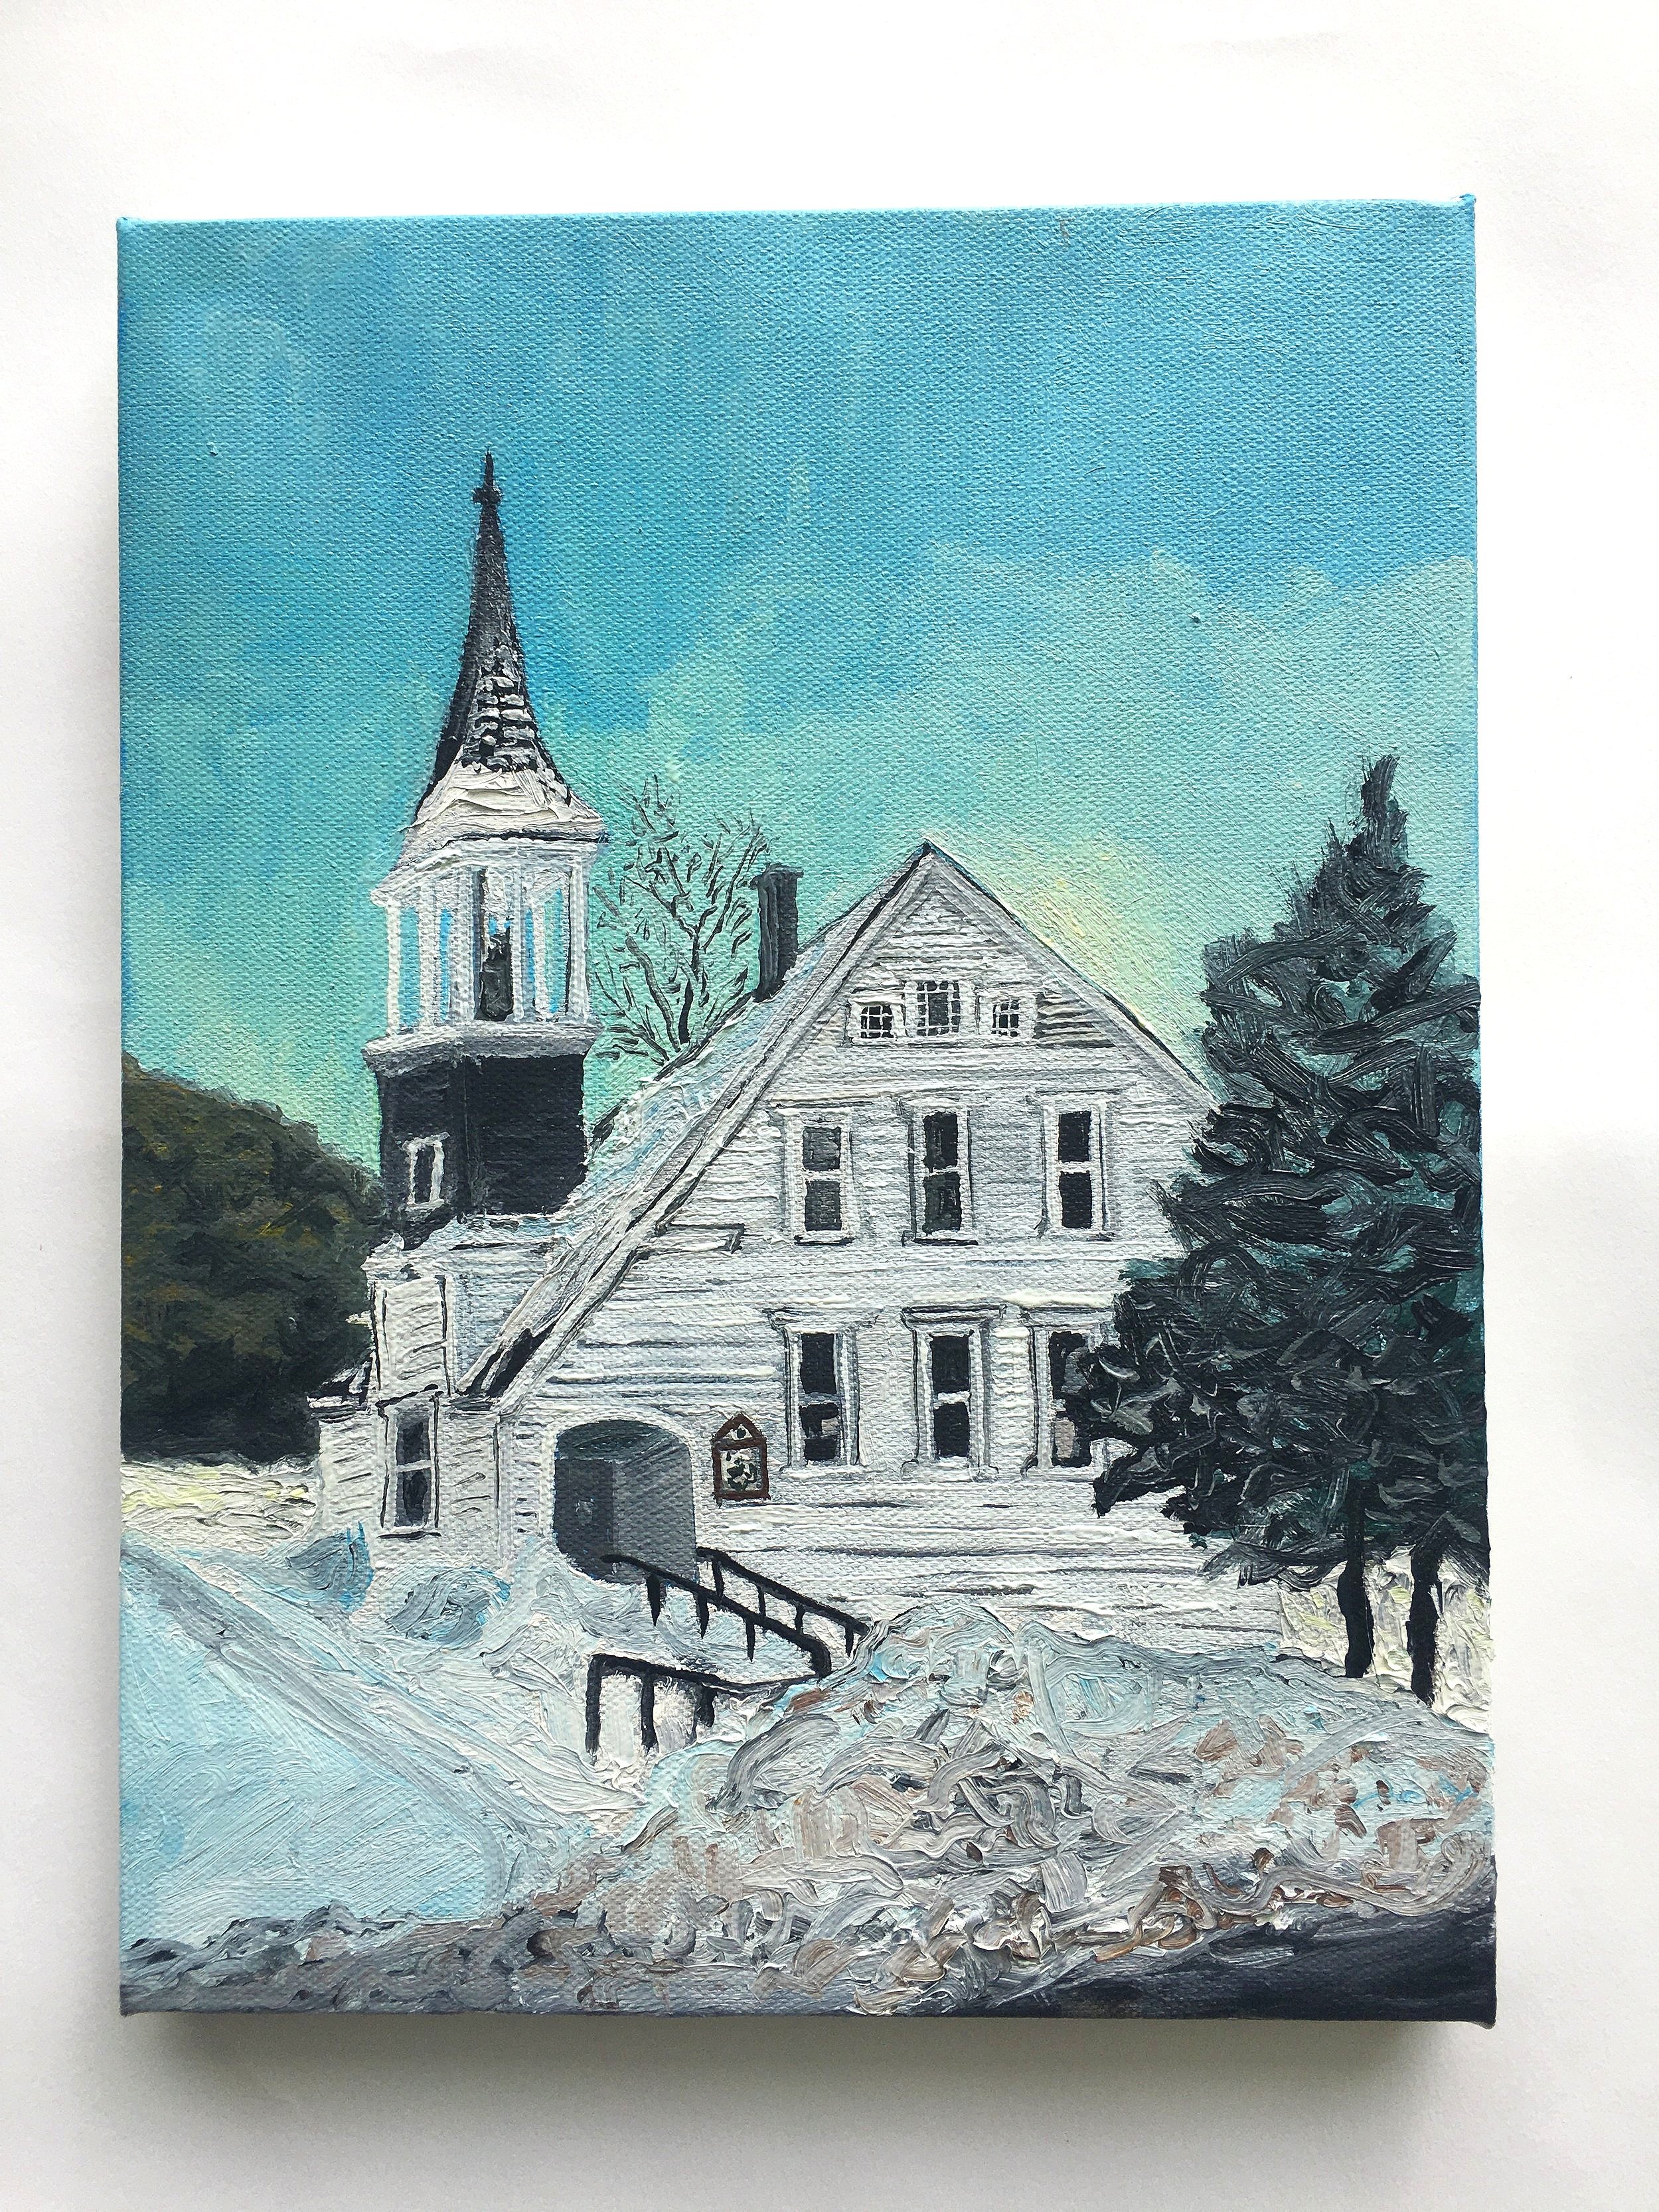  Church in Town, Oil on Canvas, 12” x 9”, 2021 